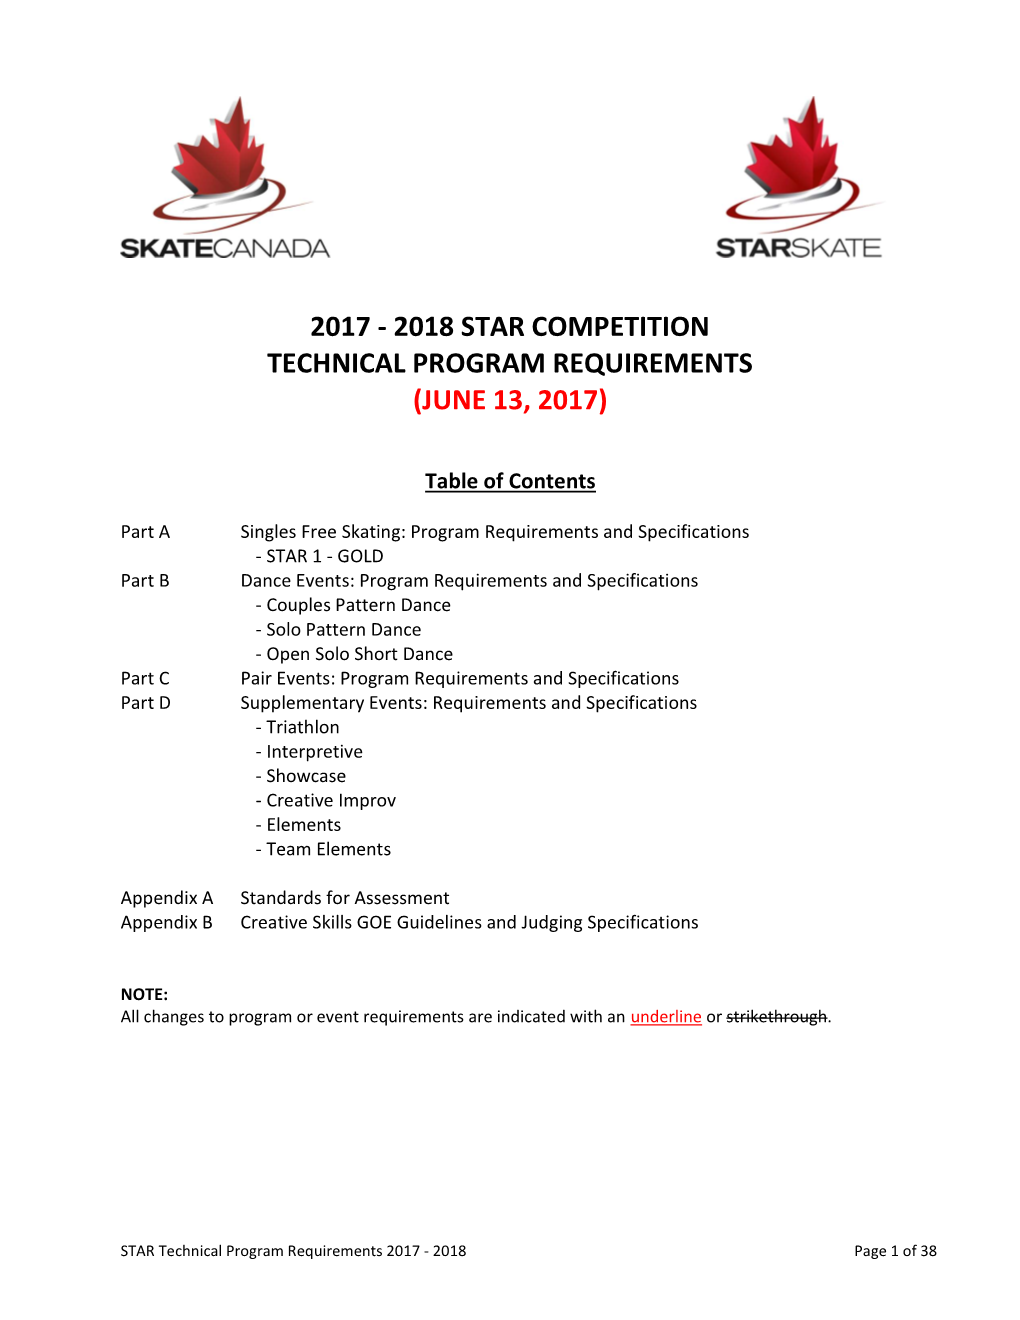 2017 - 2018 Star Competition Technical Program Requirements (June 13, 2017)